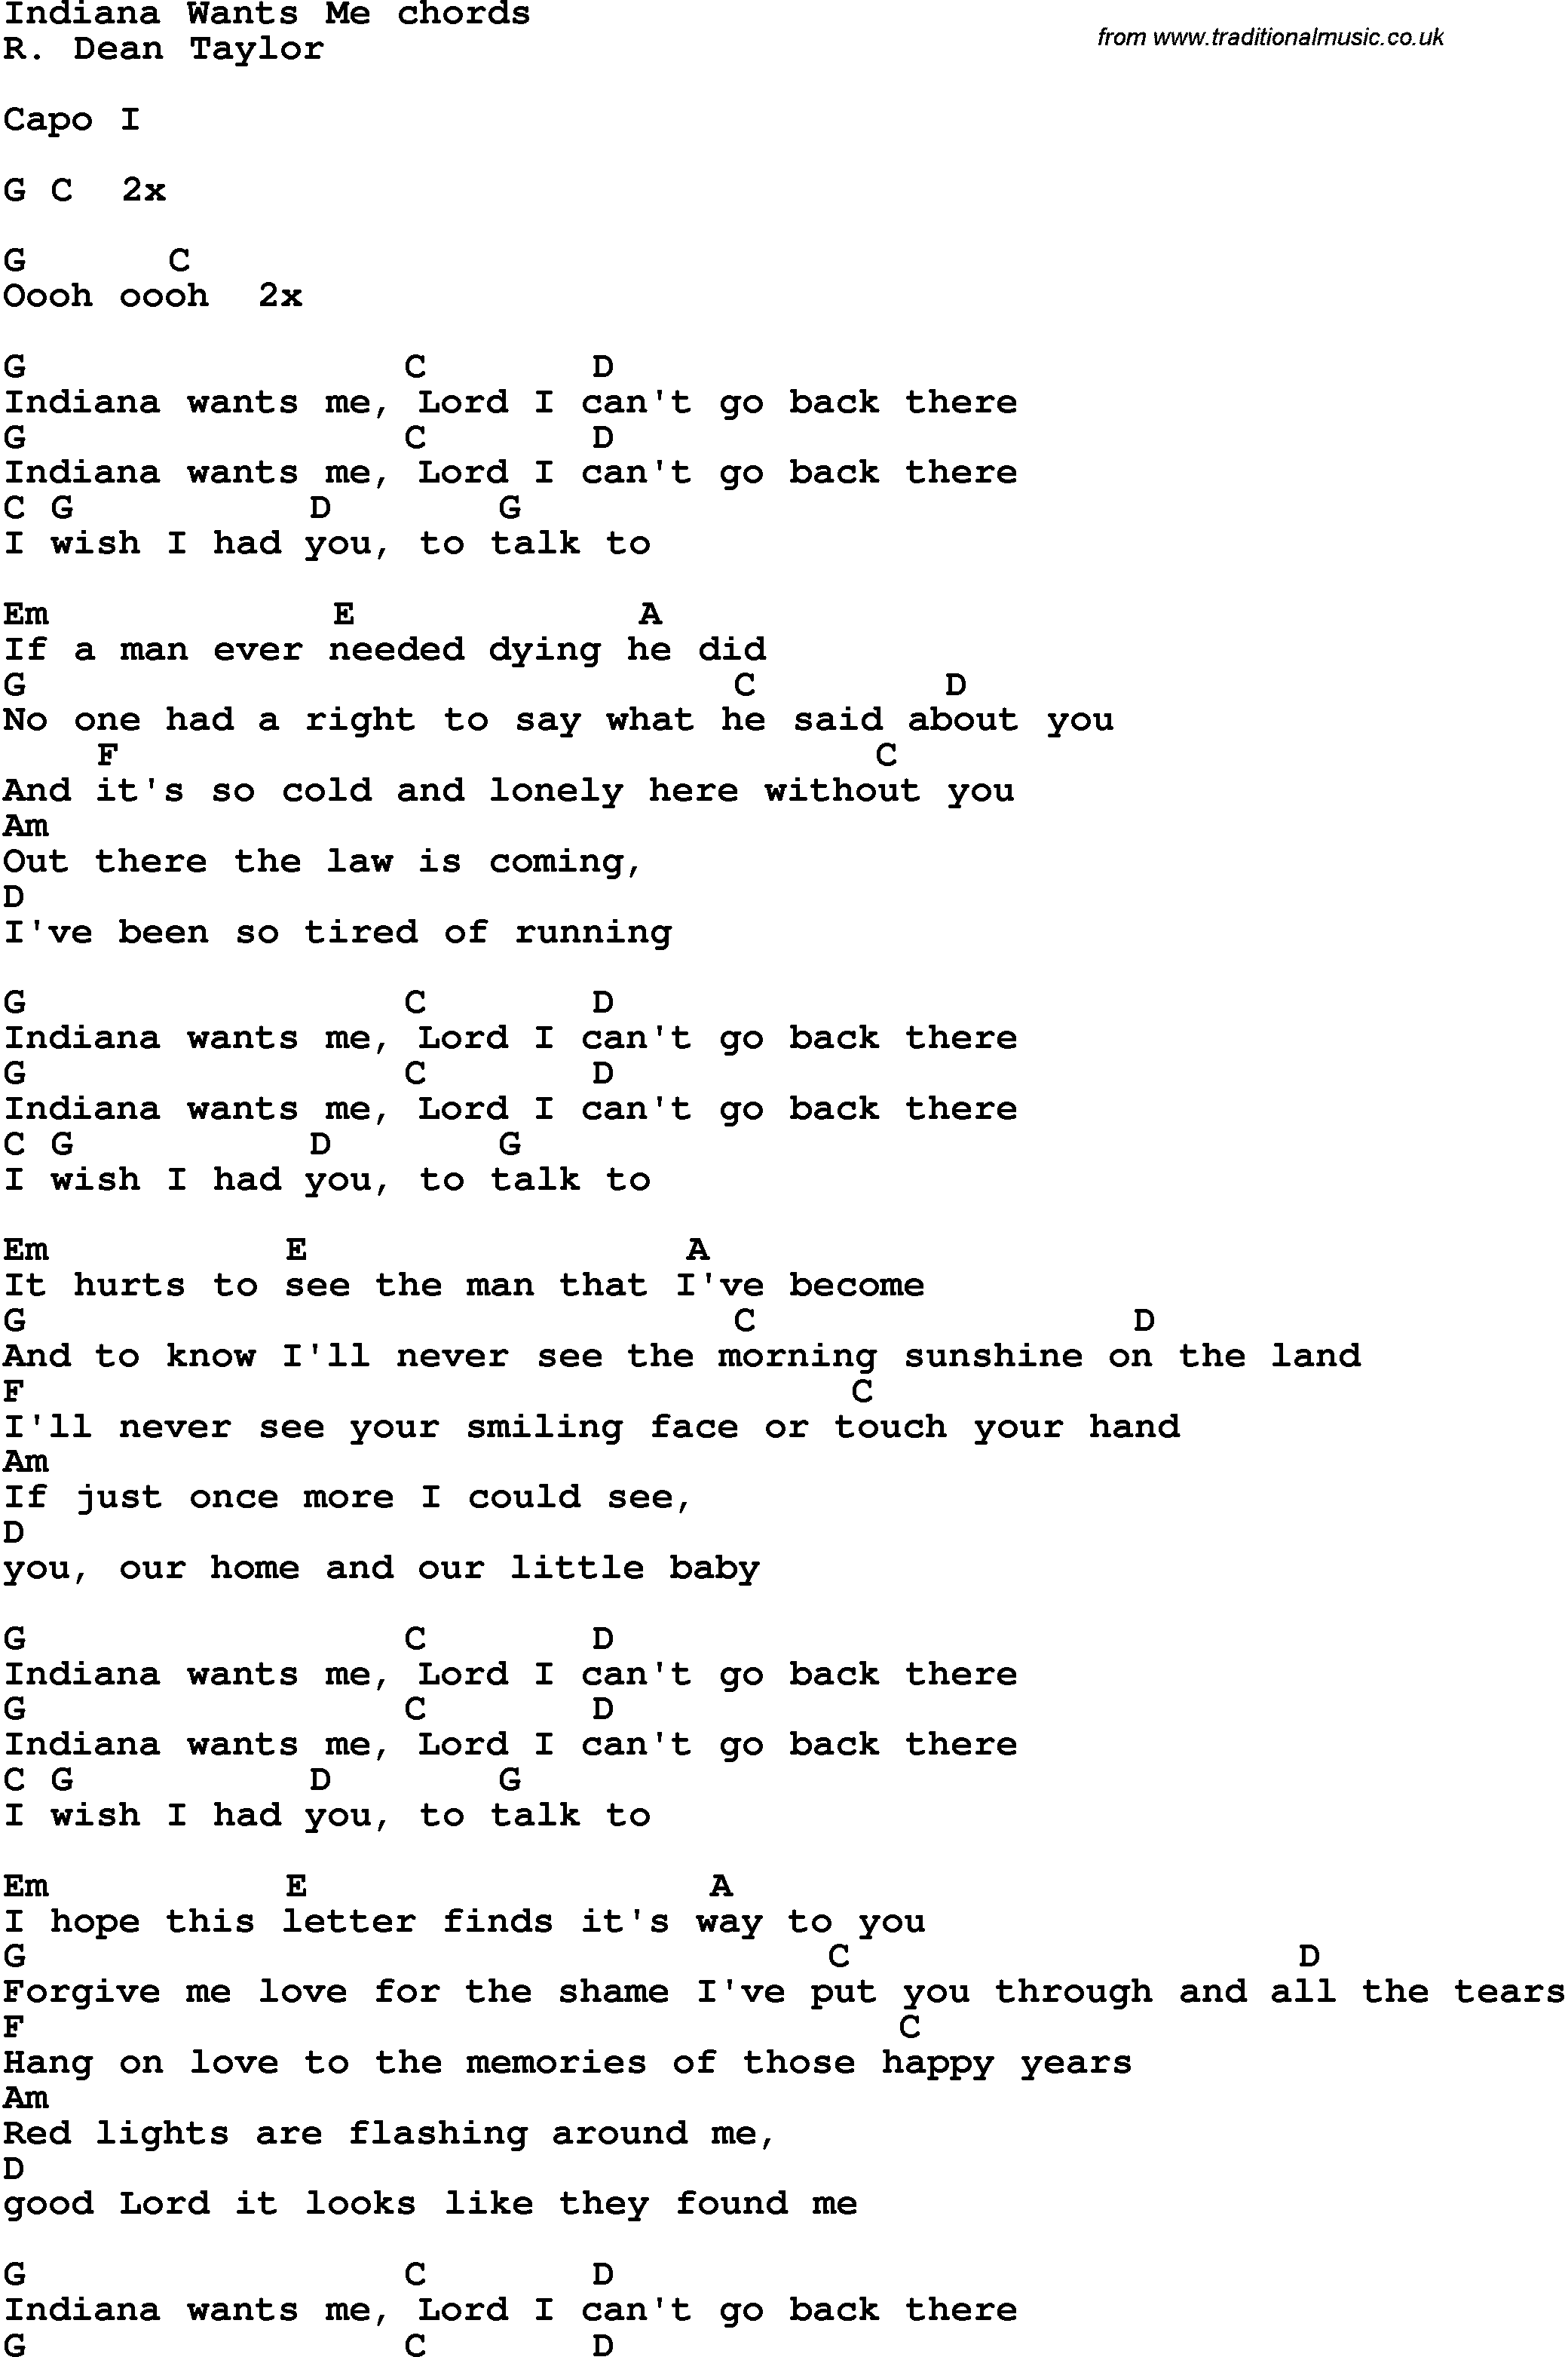 Song Lyrics with guitar chords for Indiana Wants Me